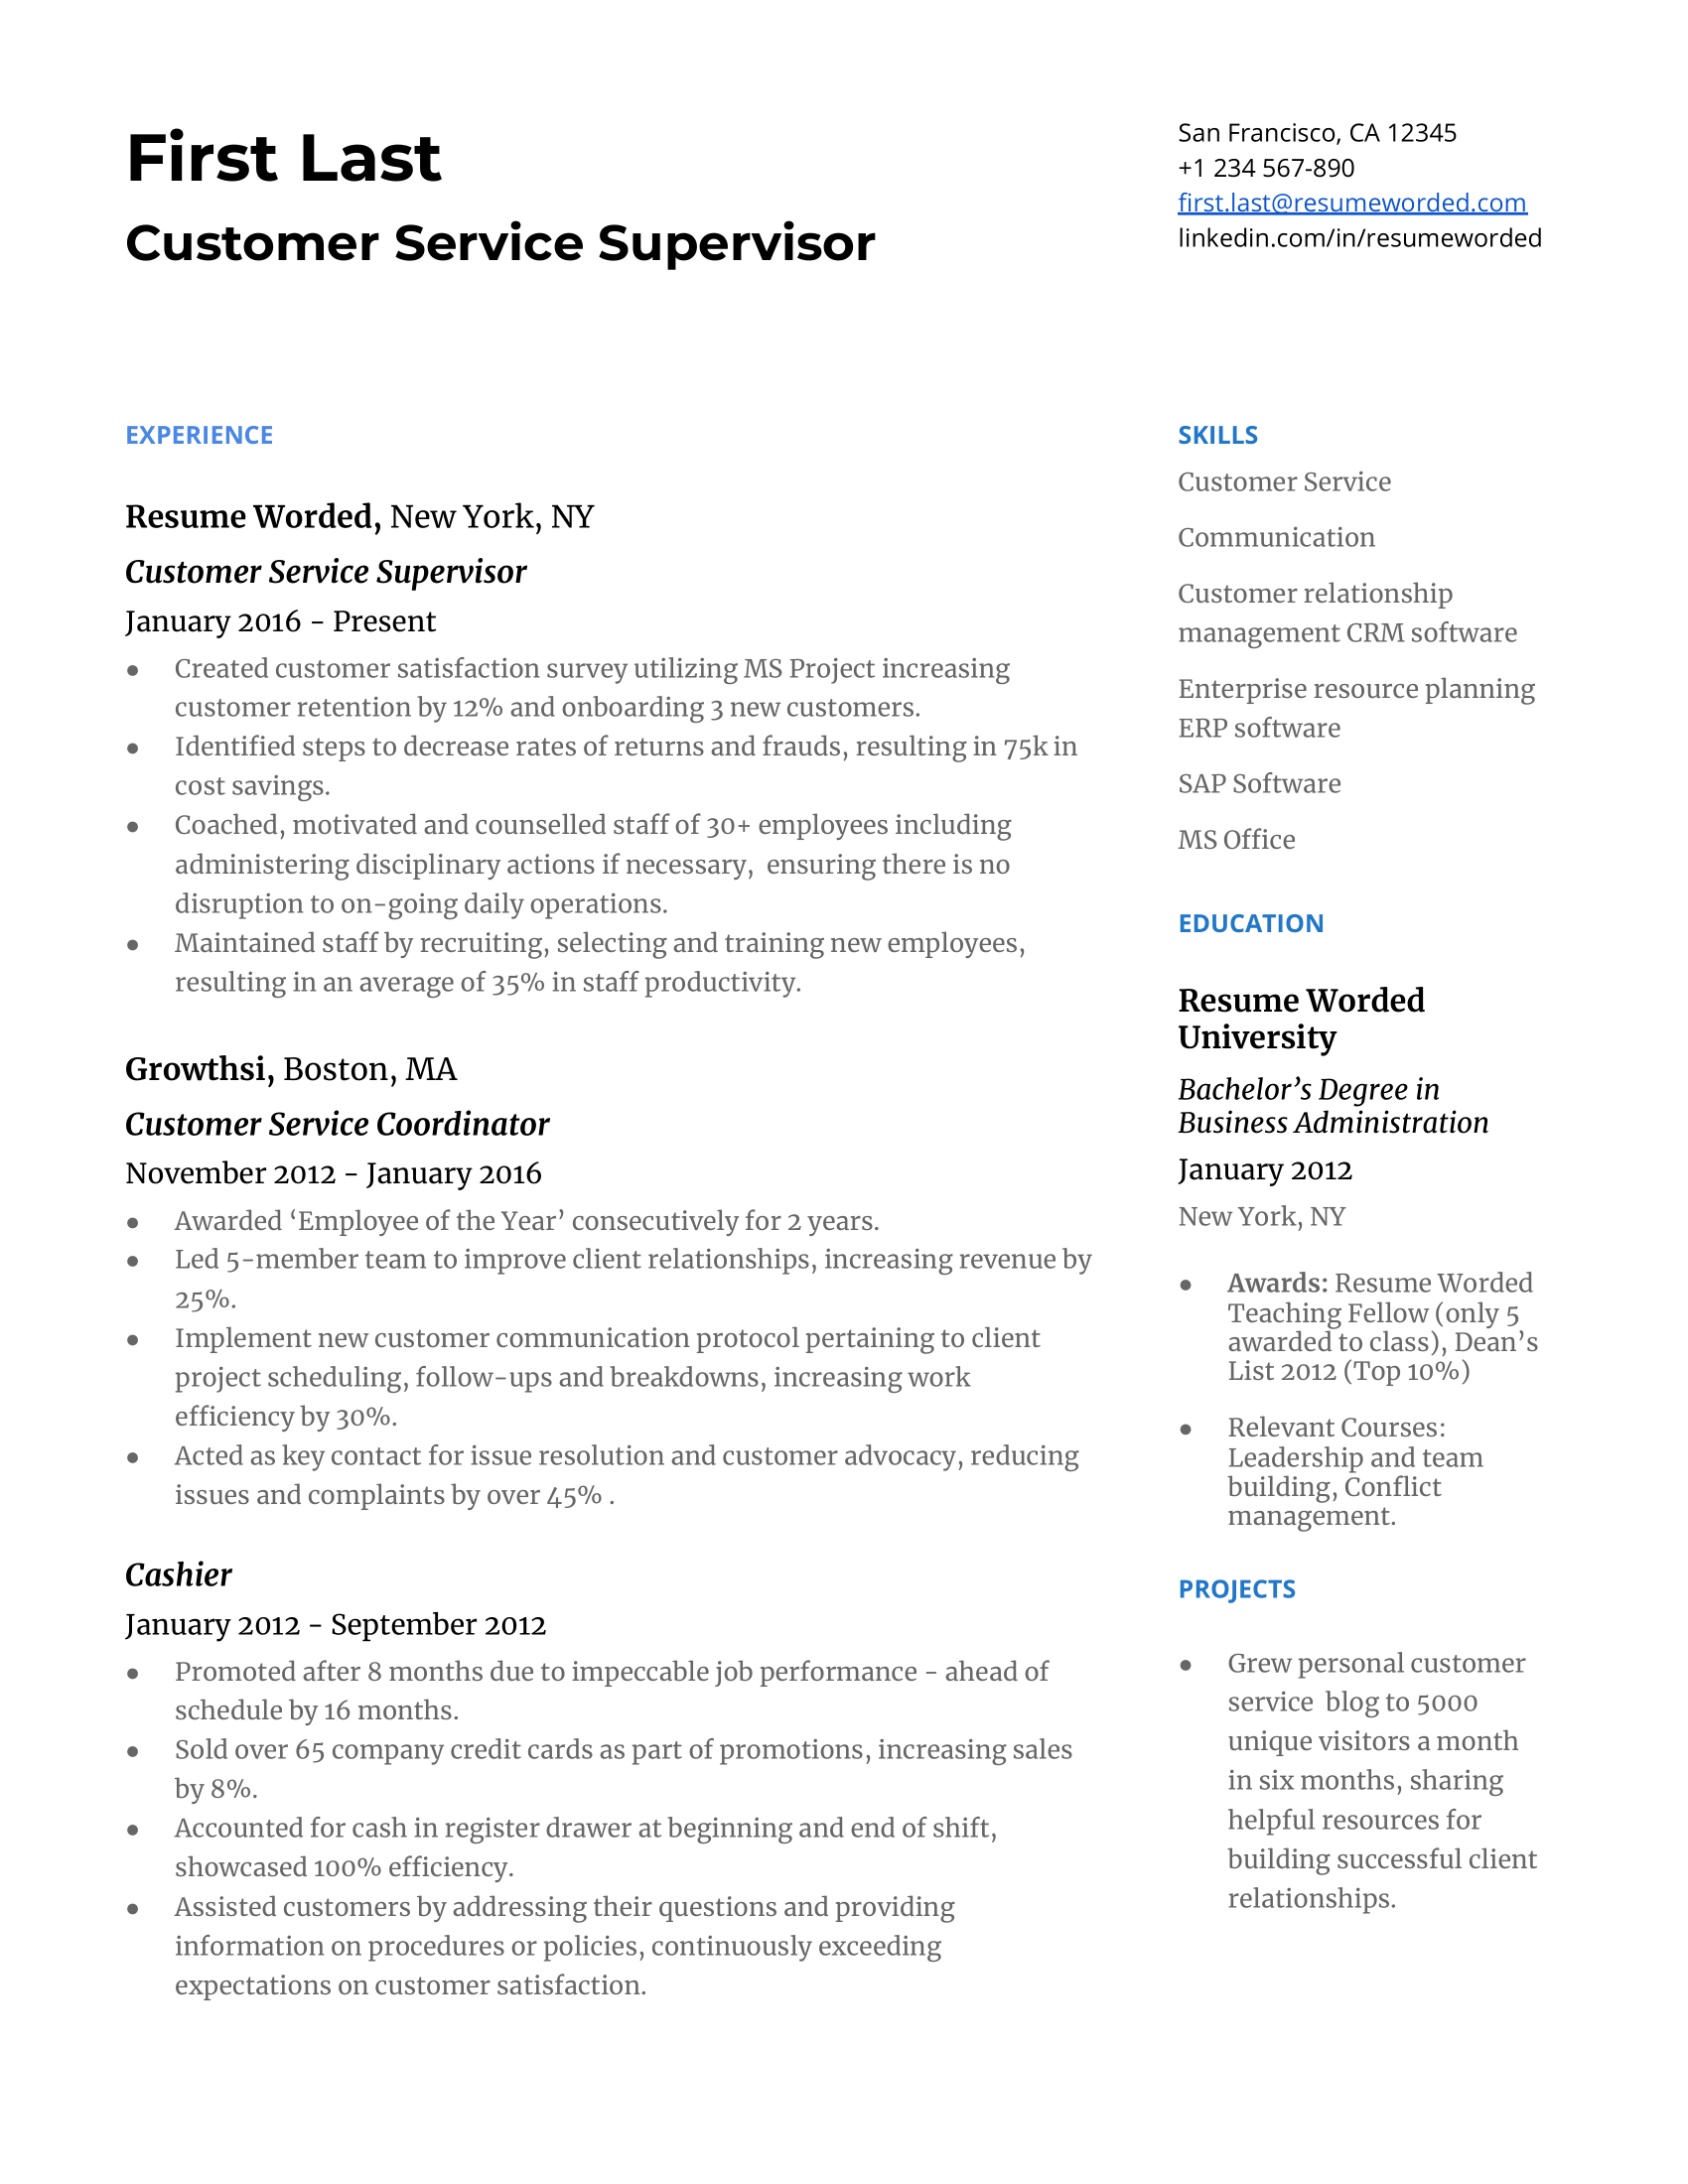 A resume for a customer service supervisor with a bachelor's degree in business and prior experience as a customer service coordinator.